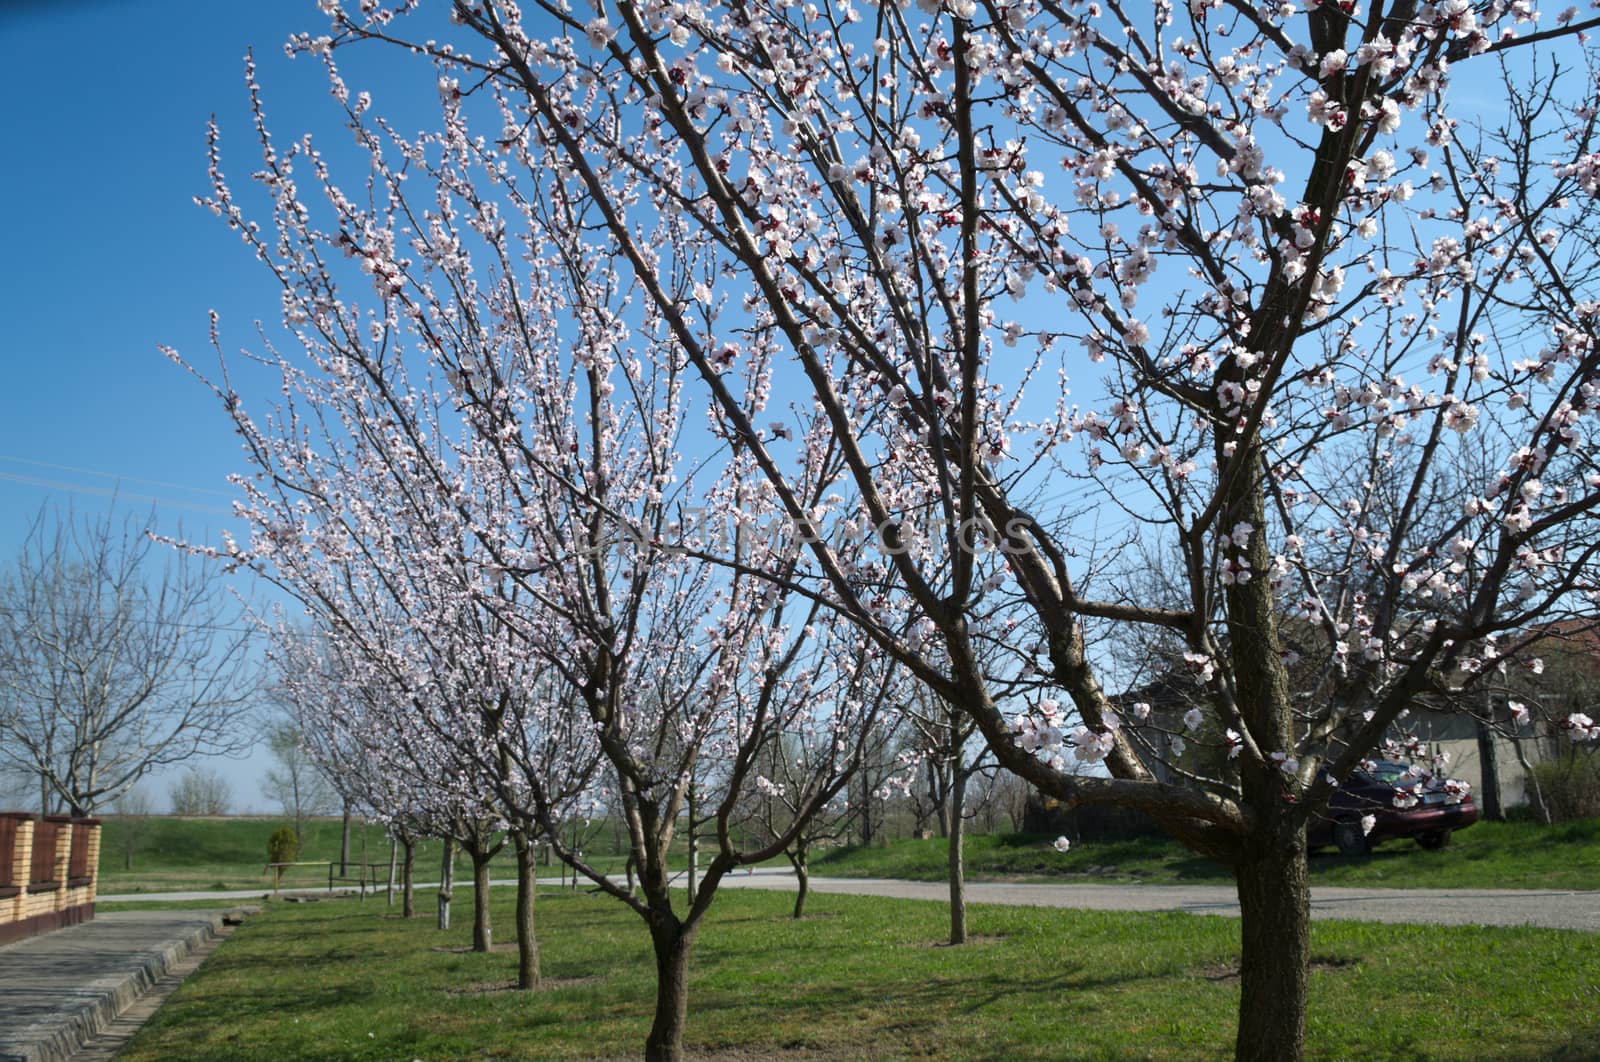 Flowering apricot trees at sprig time by sheriffkule